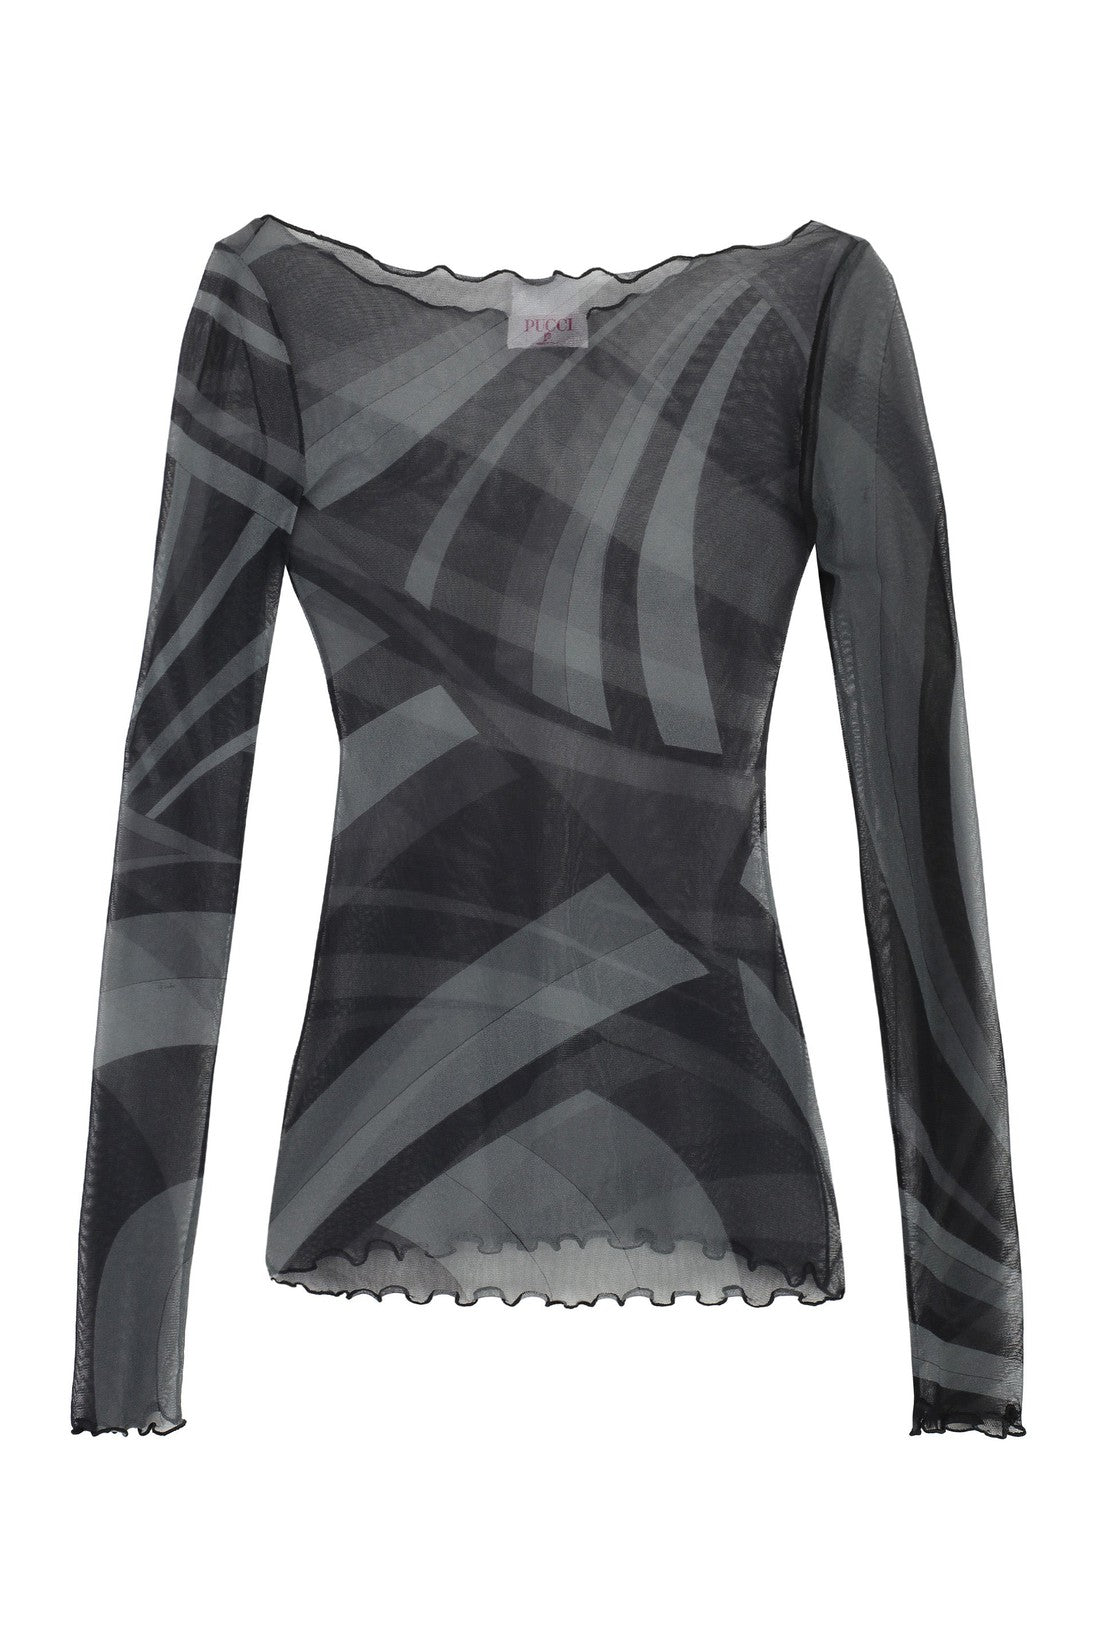 PUCCI-OUTLET-SALE-Printed long-sleeve top-ARCHIVIST